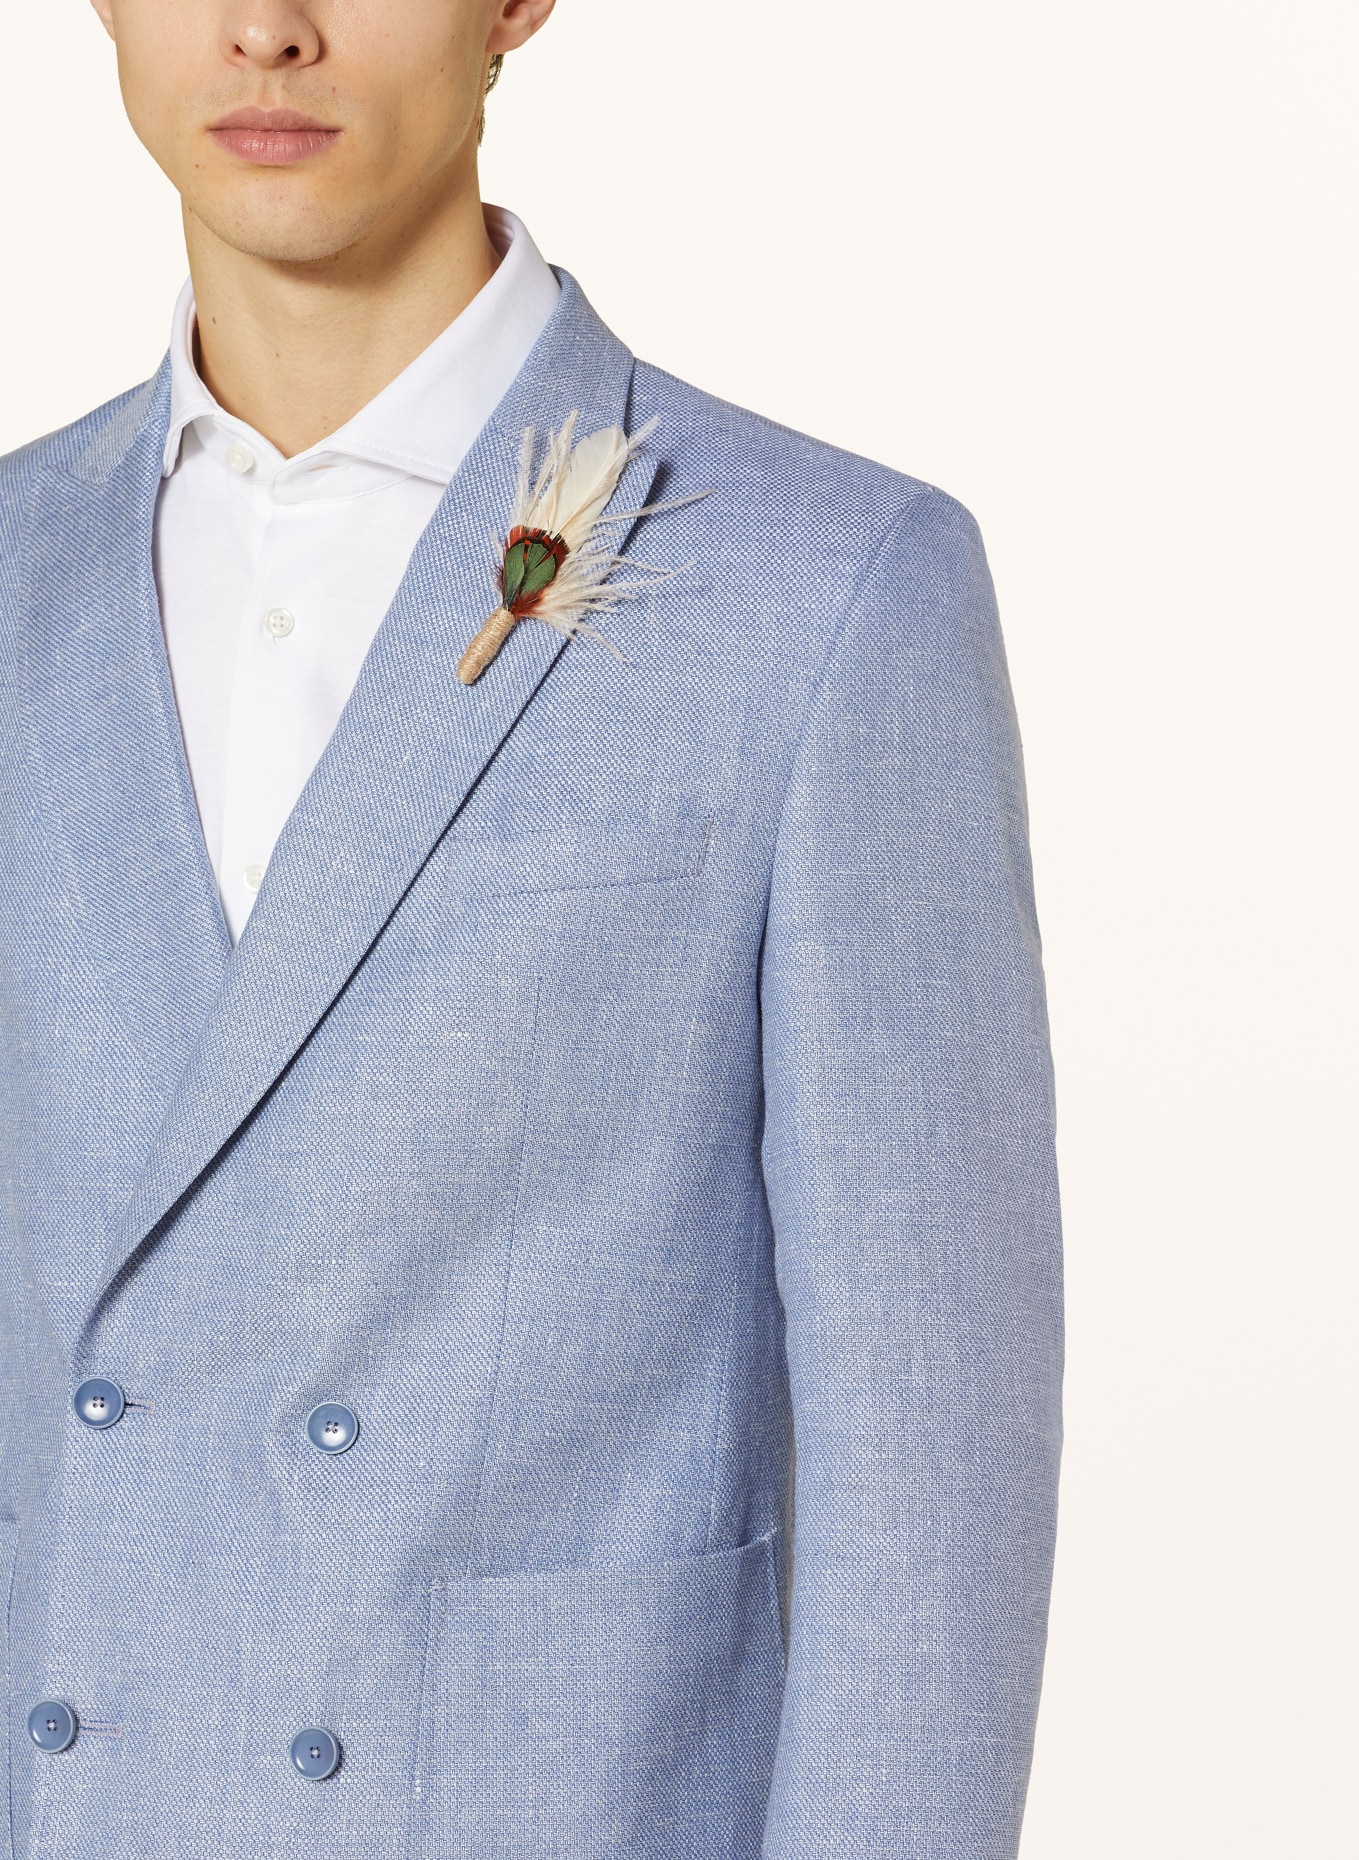 CG - CLUB of GENTS Suit jacket CG PERO slim fit with linen, Color: 61 BLAU HELL (Image 5)